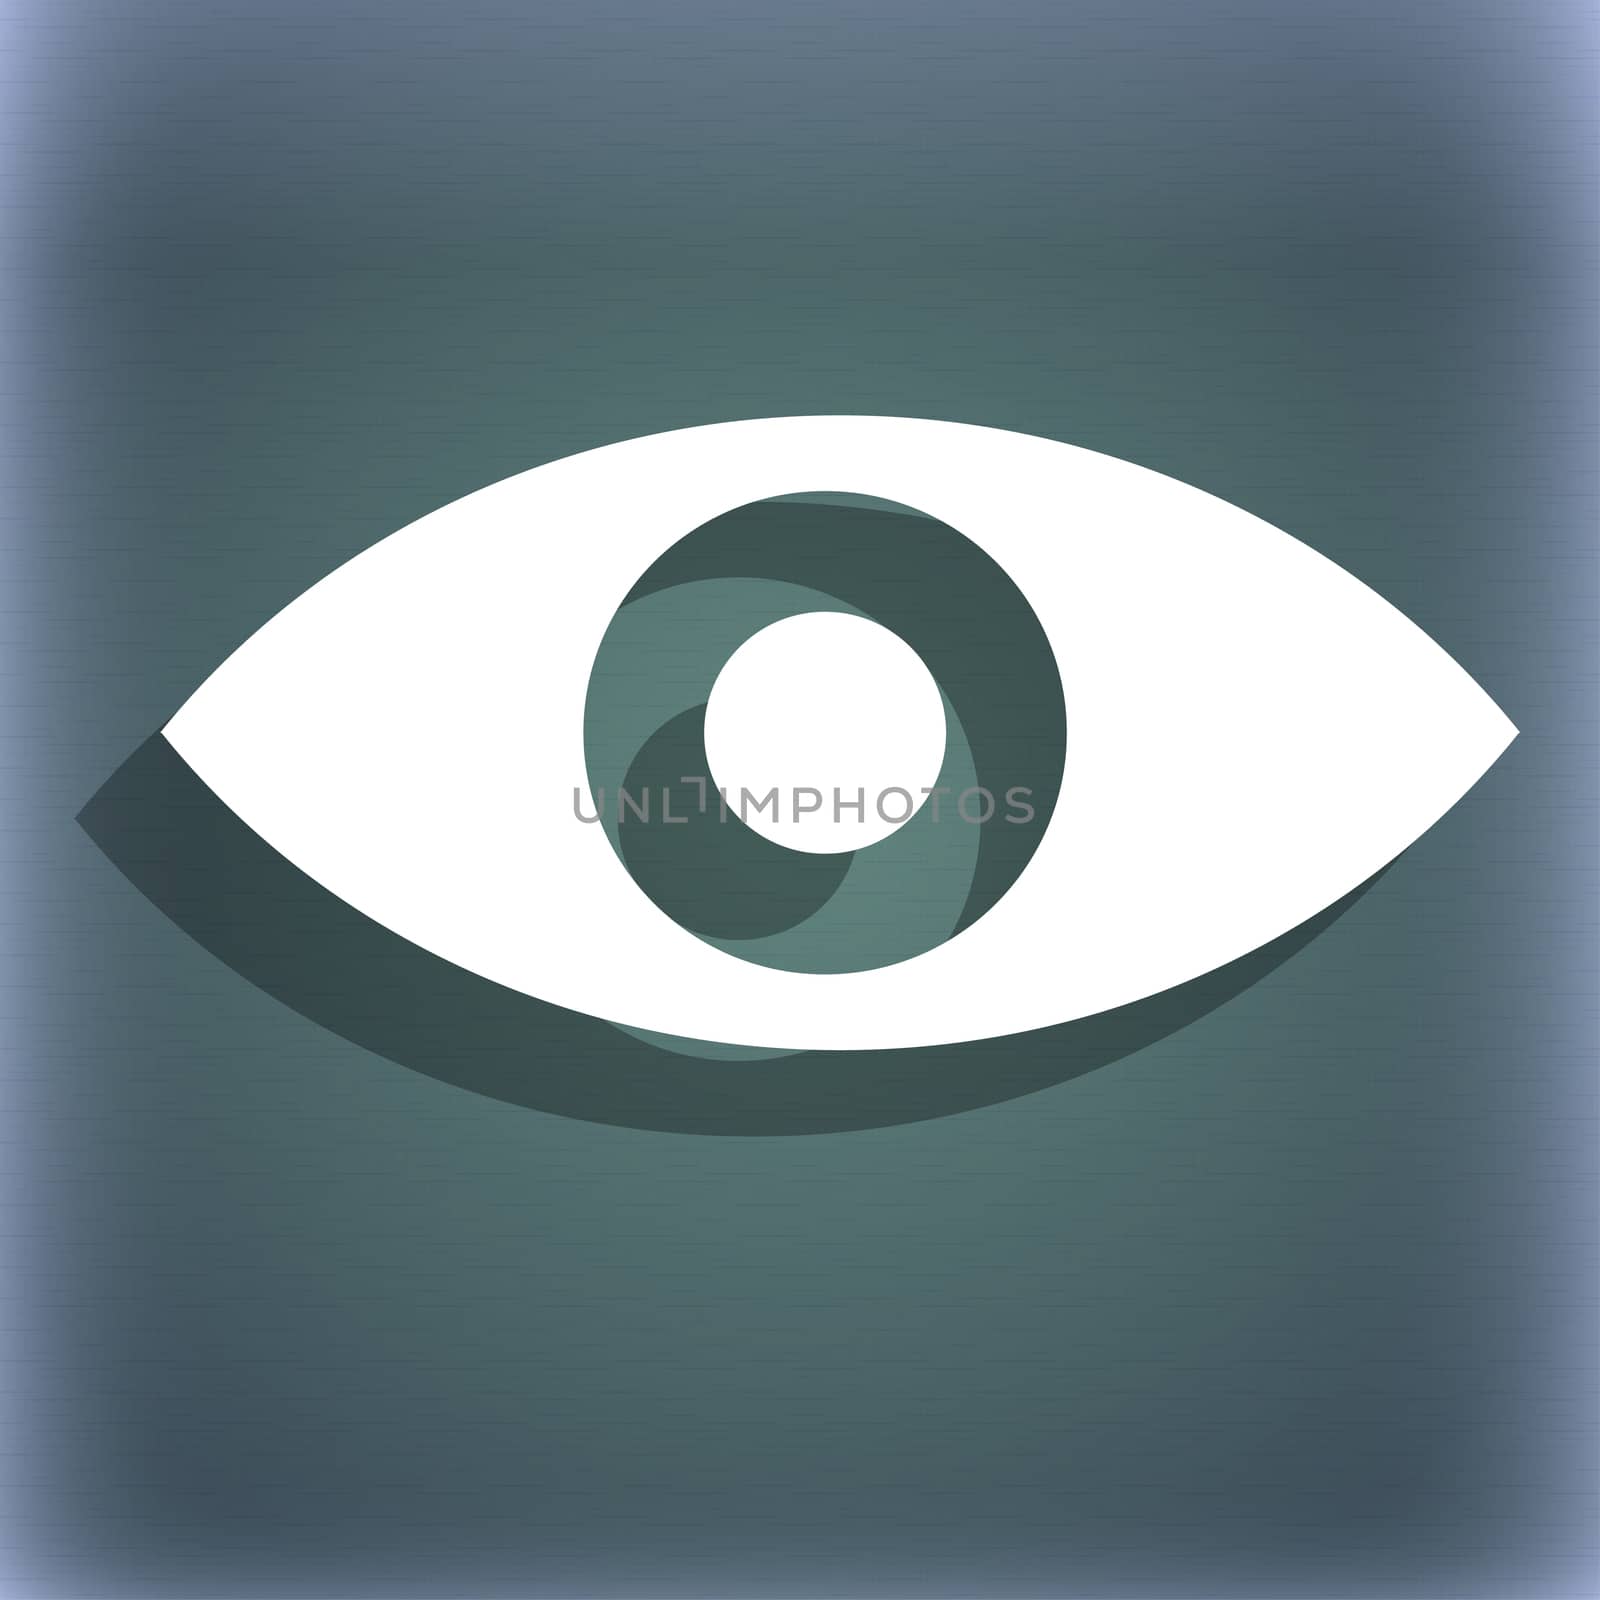 Eye, Publish content, sixth sense, intuition icon symbol on the blue-green abstract background with shadow and space for your text. illustration